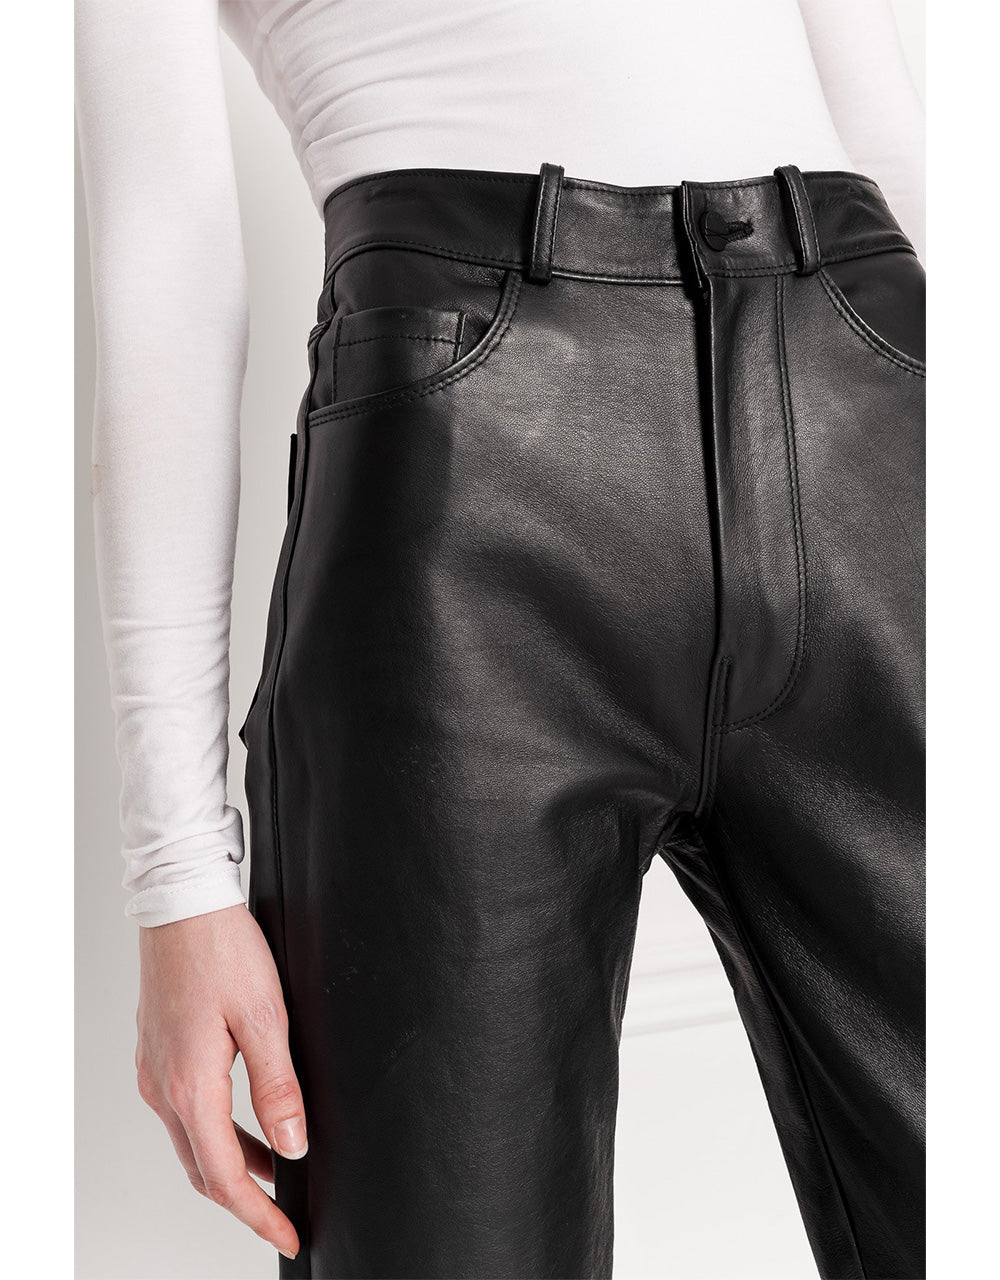 Adeline Leather Jeans